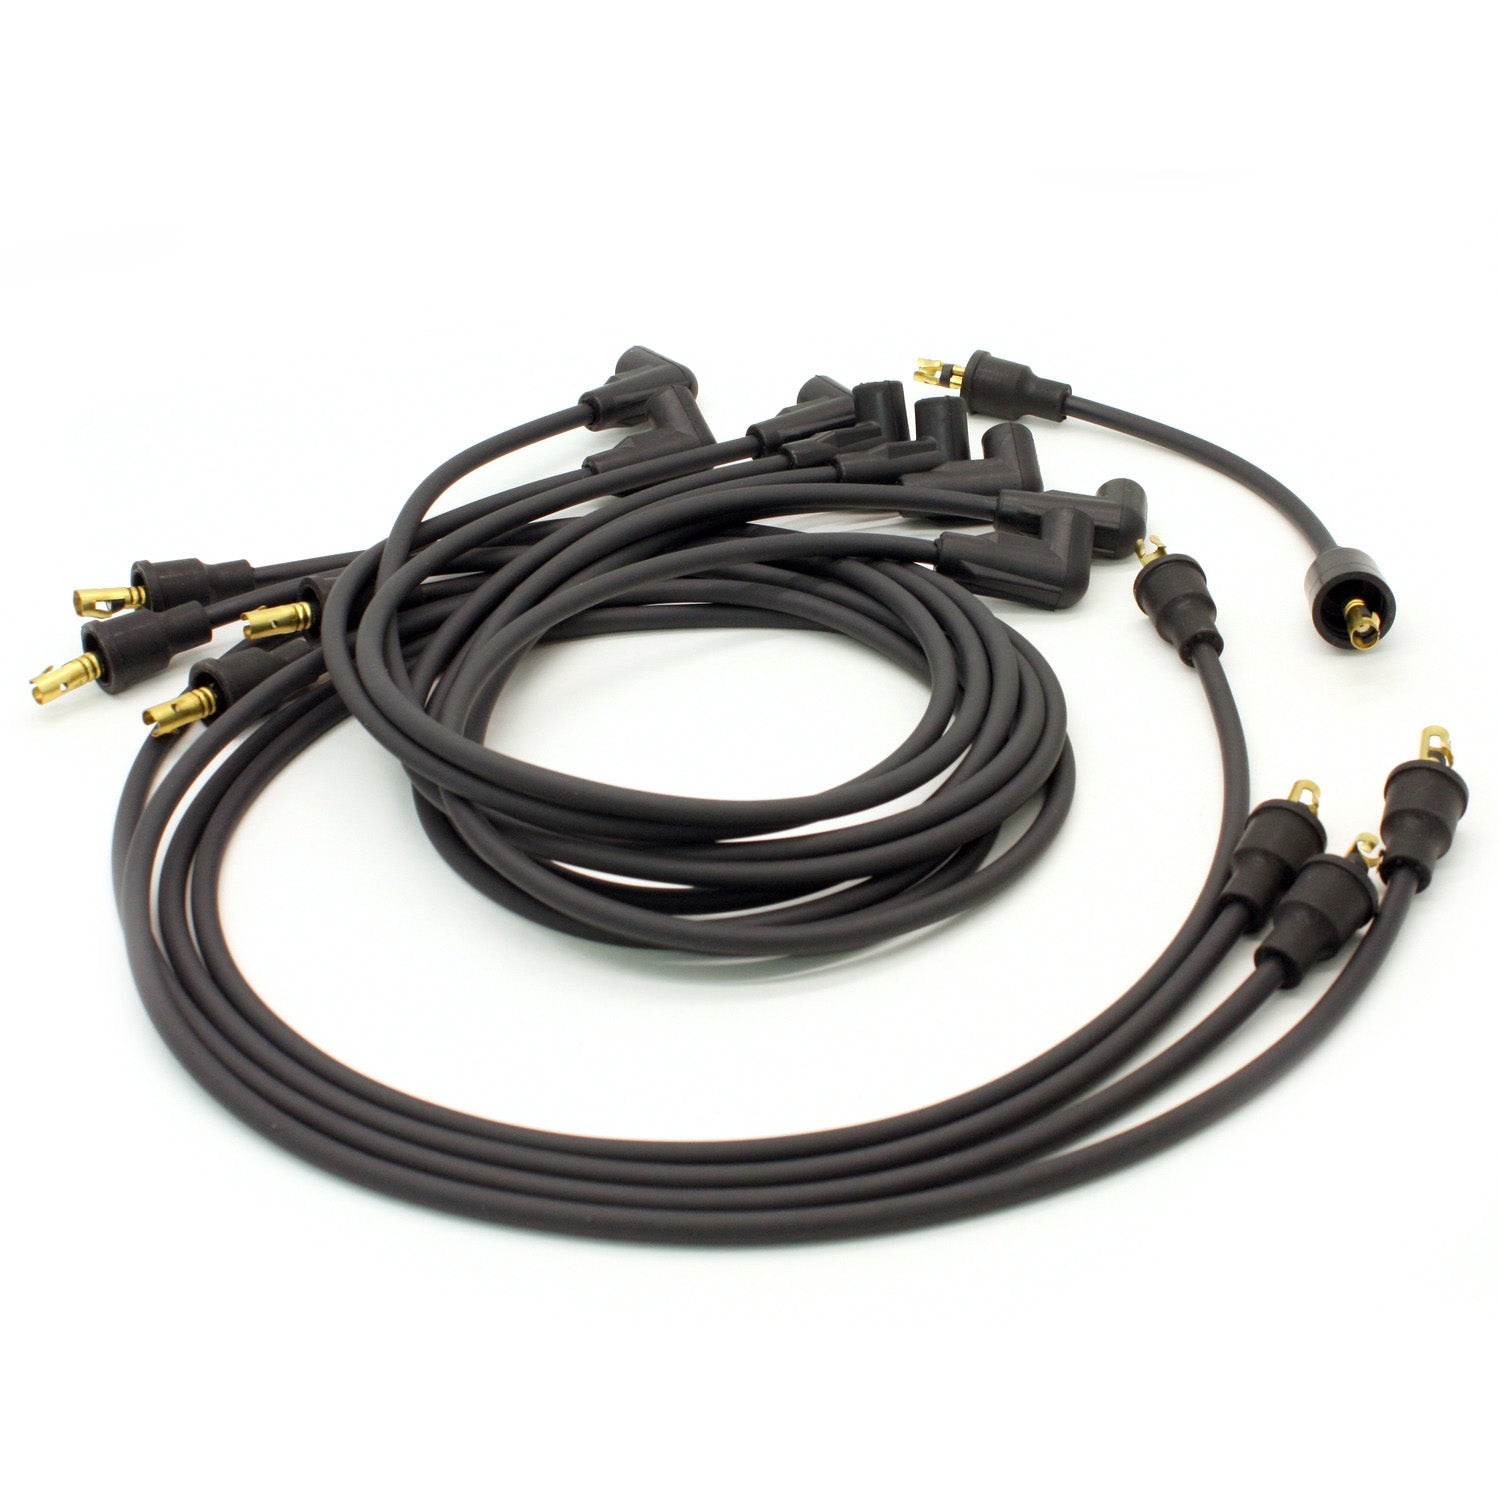 Pertronix 708180 PerTronix 708190 Flame-Thrower Spark Plug Wires 8